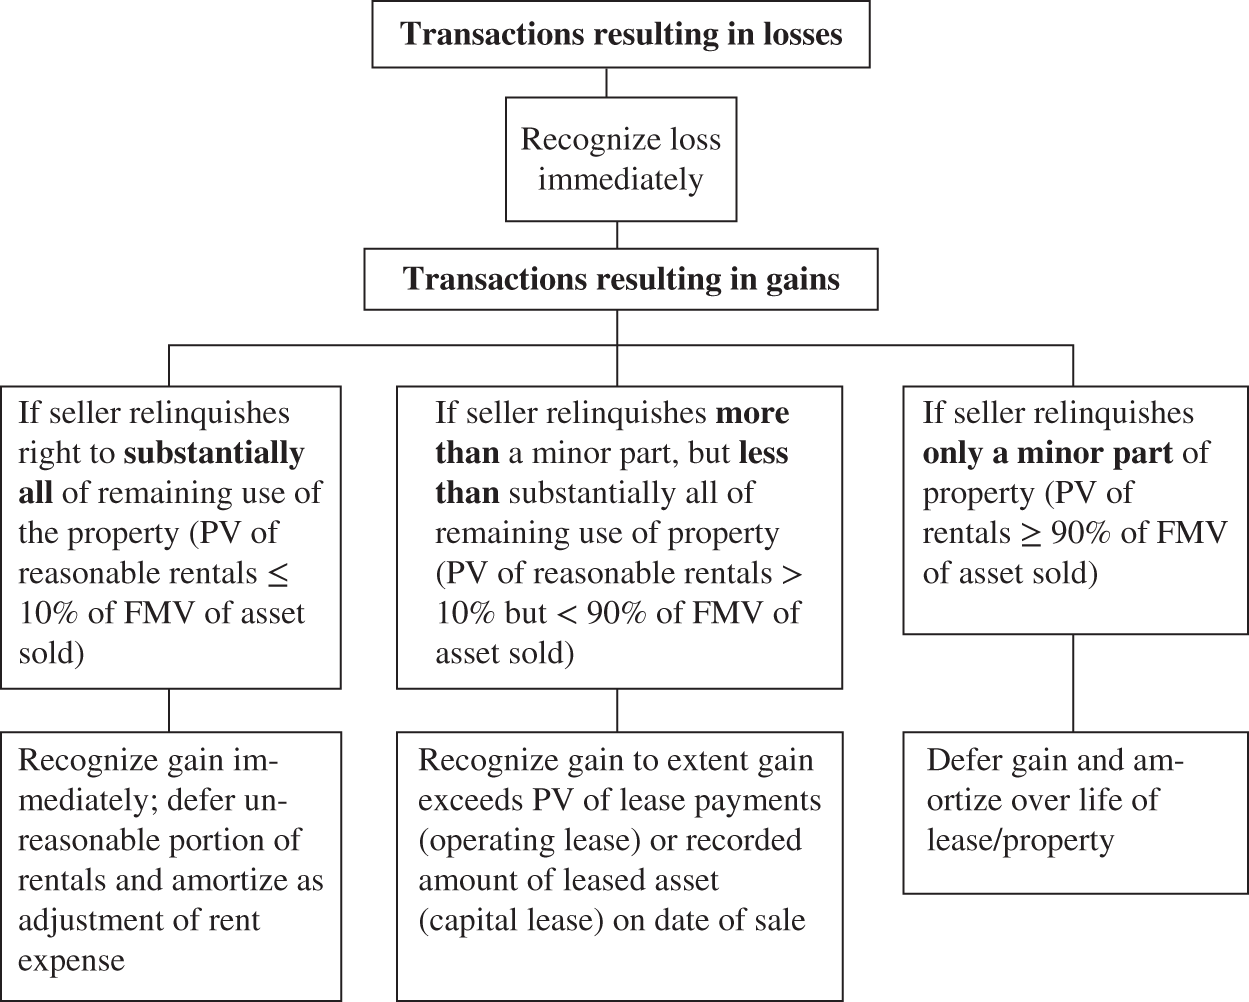 Flow chart summarizing the accounting for sale-leaseback transactions - transactions resulting in losses and in gains to recognize loss immediately.